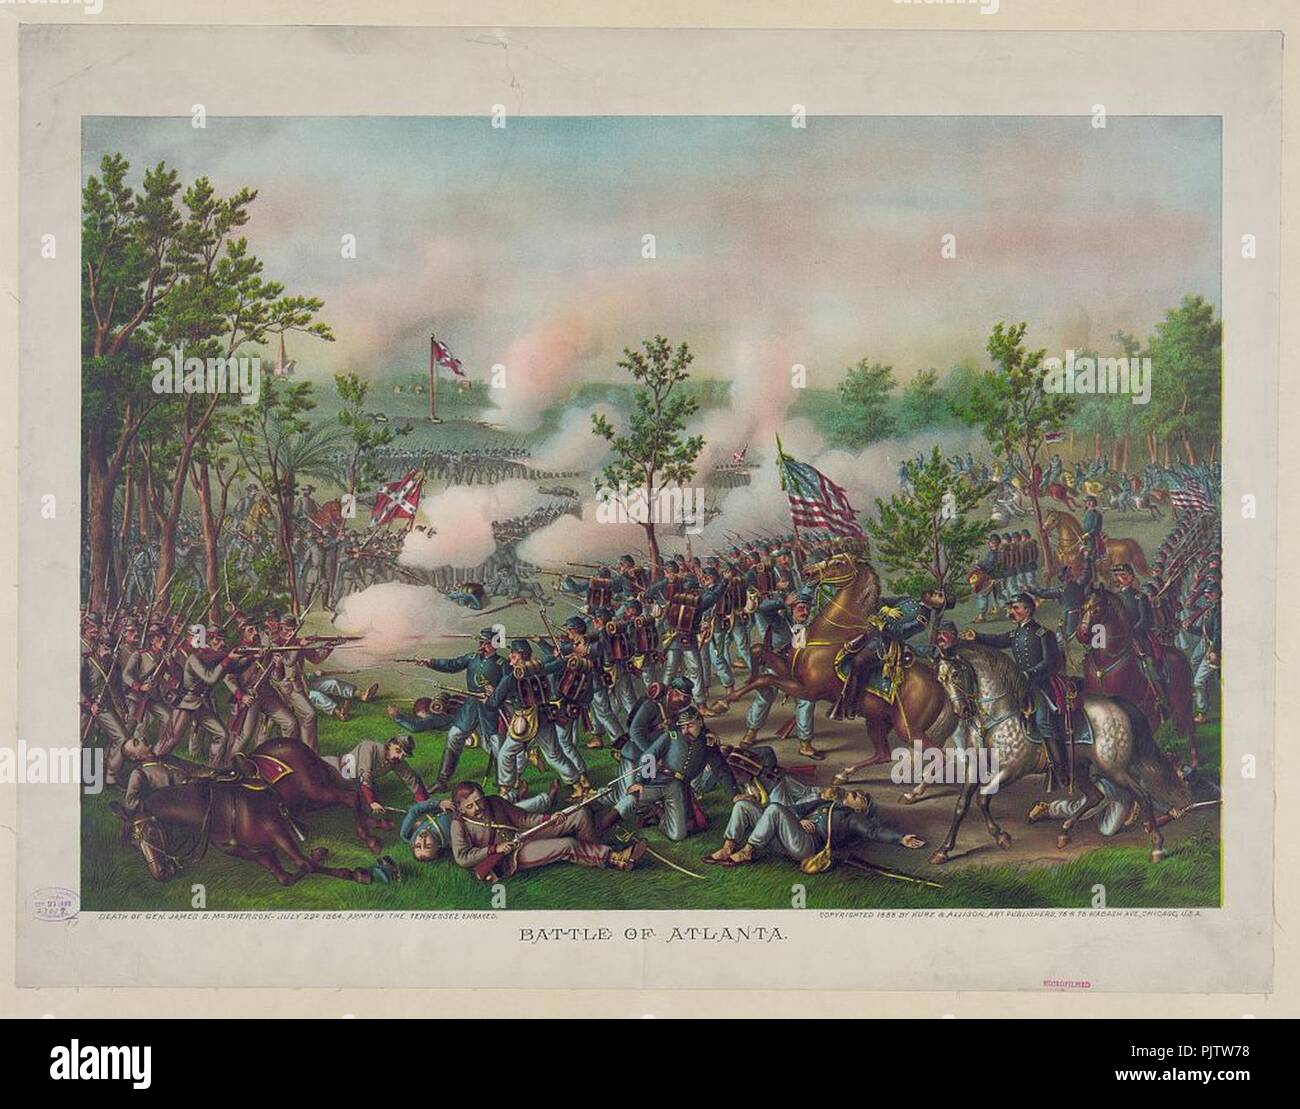 Battle of Atlanta-Death of Gen. James B. McPherson-July 22d 1864-Army of the Tennessee engaged Stock Photo